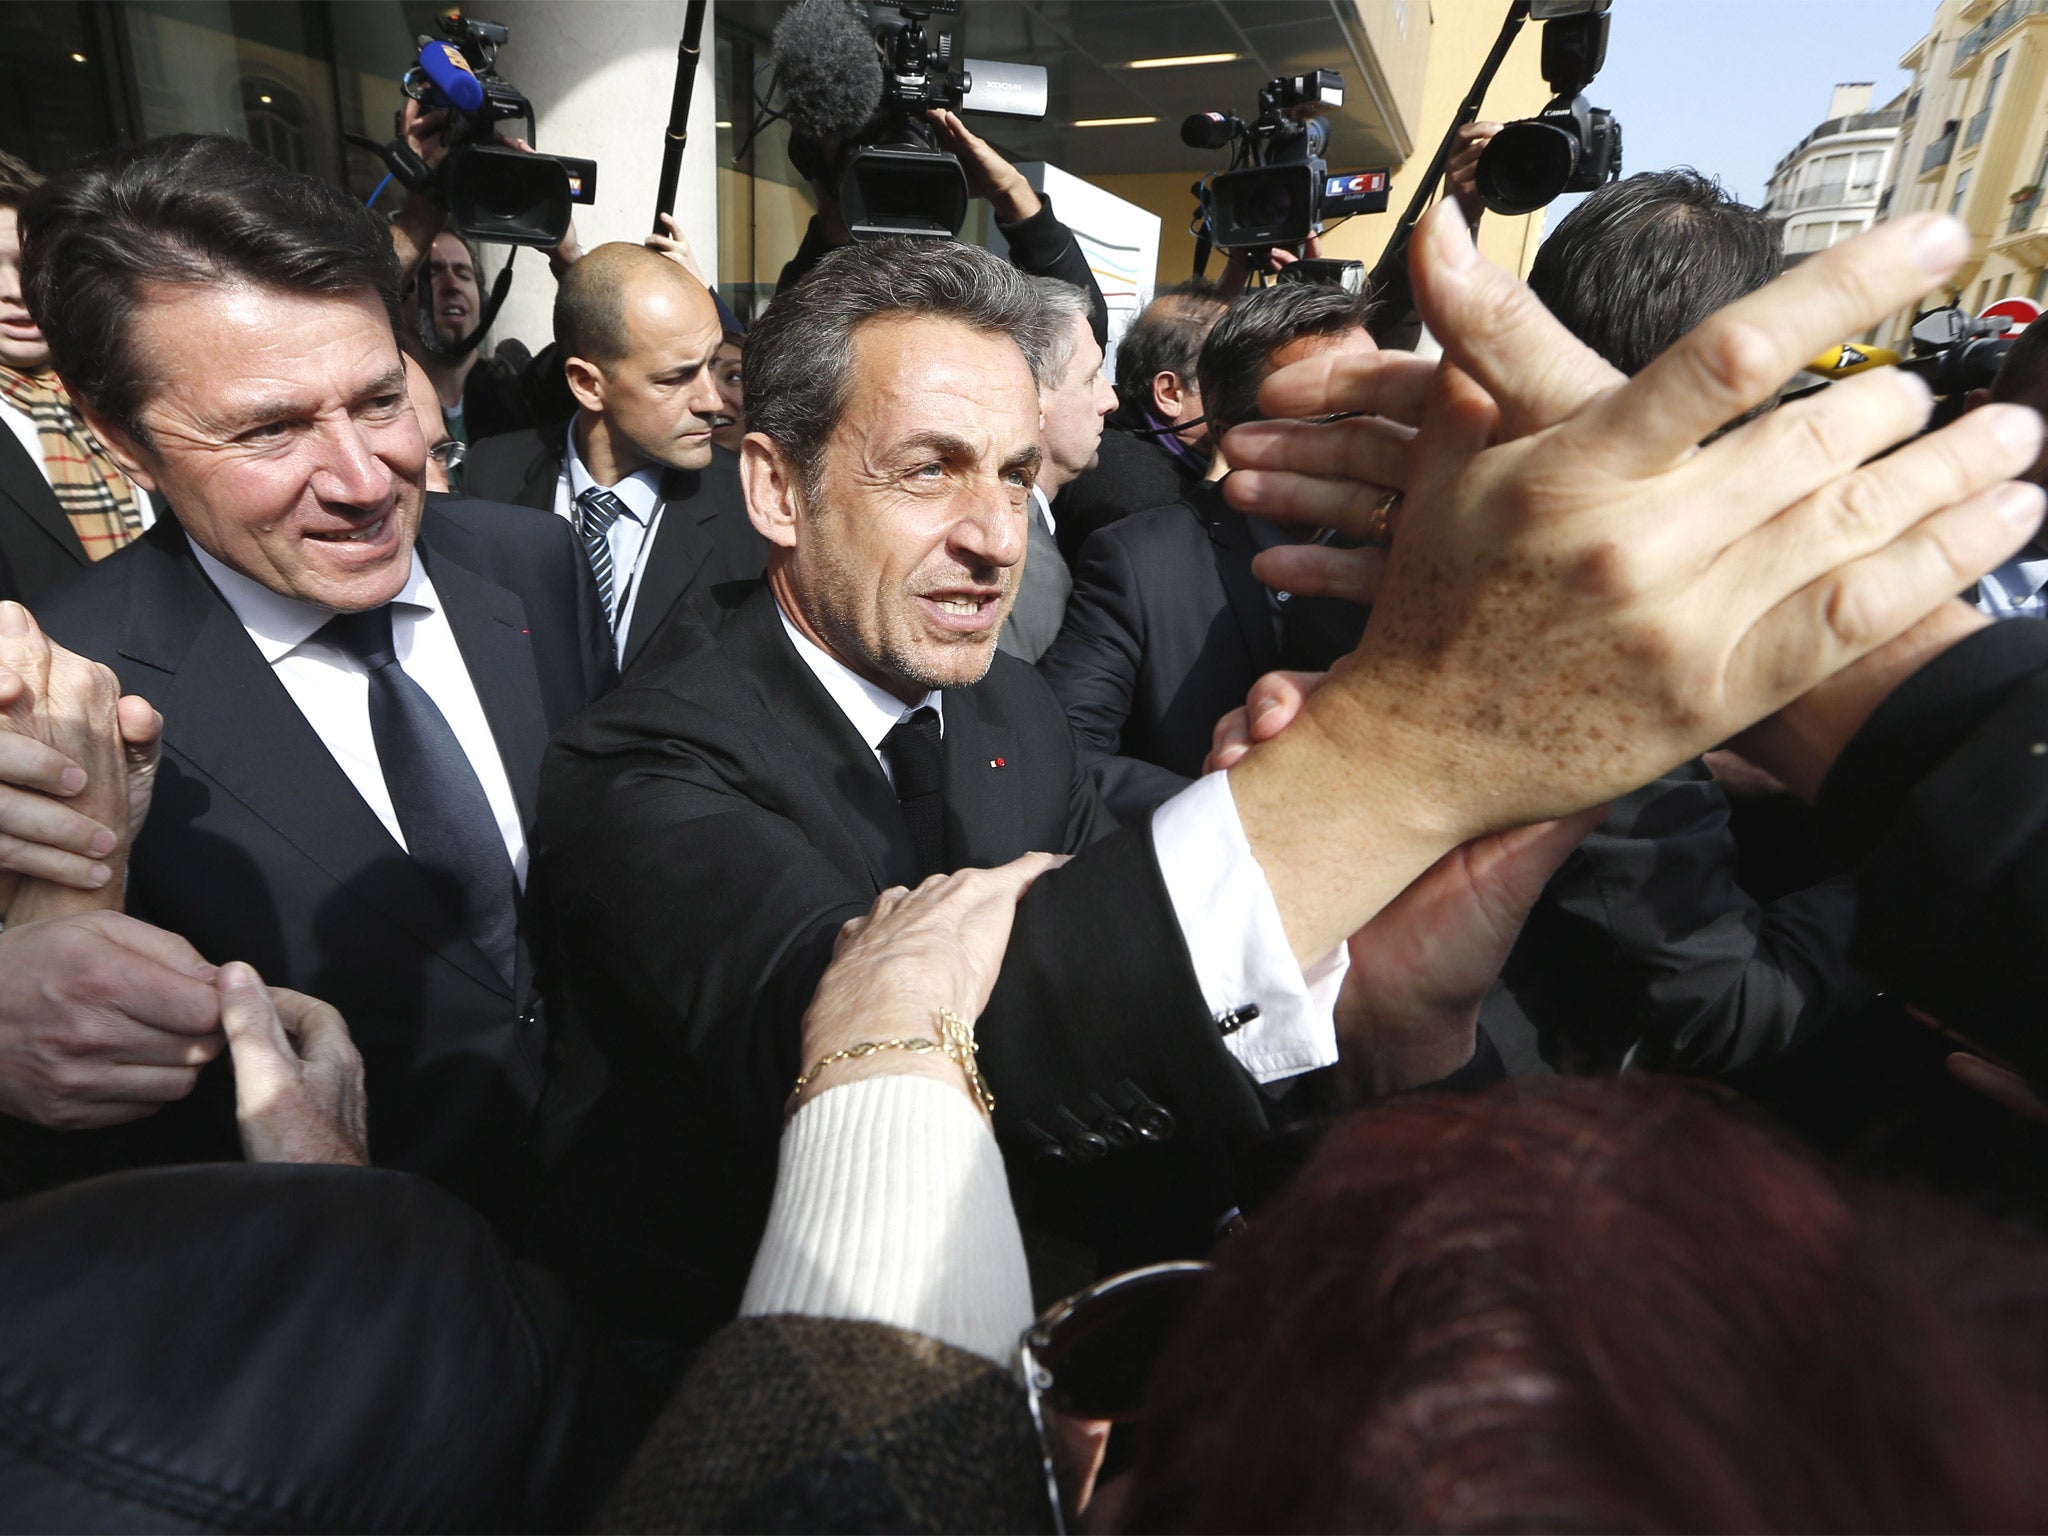 Mr Sarkozy wrote a passionate and vituperative two page article in the newspaper Le Figaro accusing the Socialist government of acting like a “dictatorship” and trampling “human rights”.